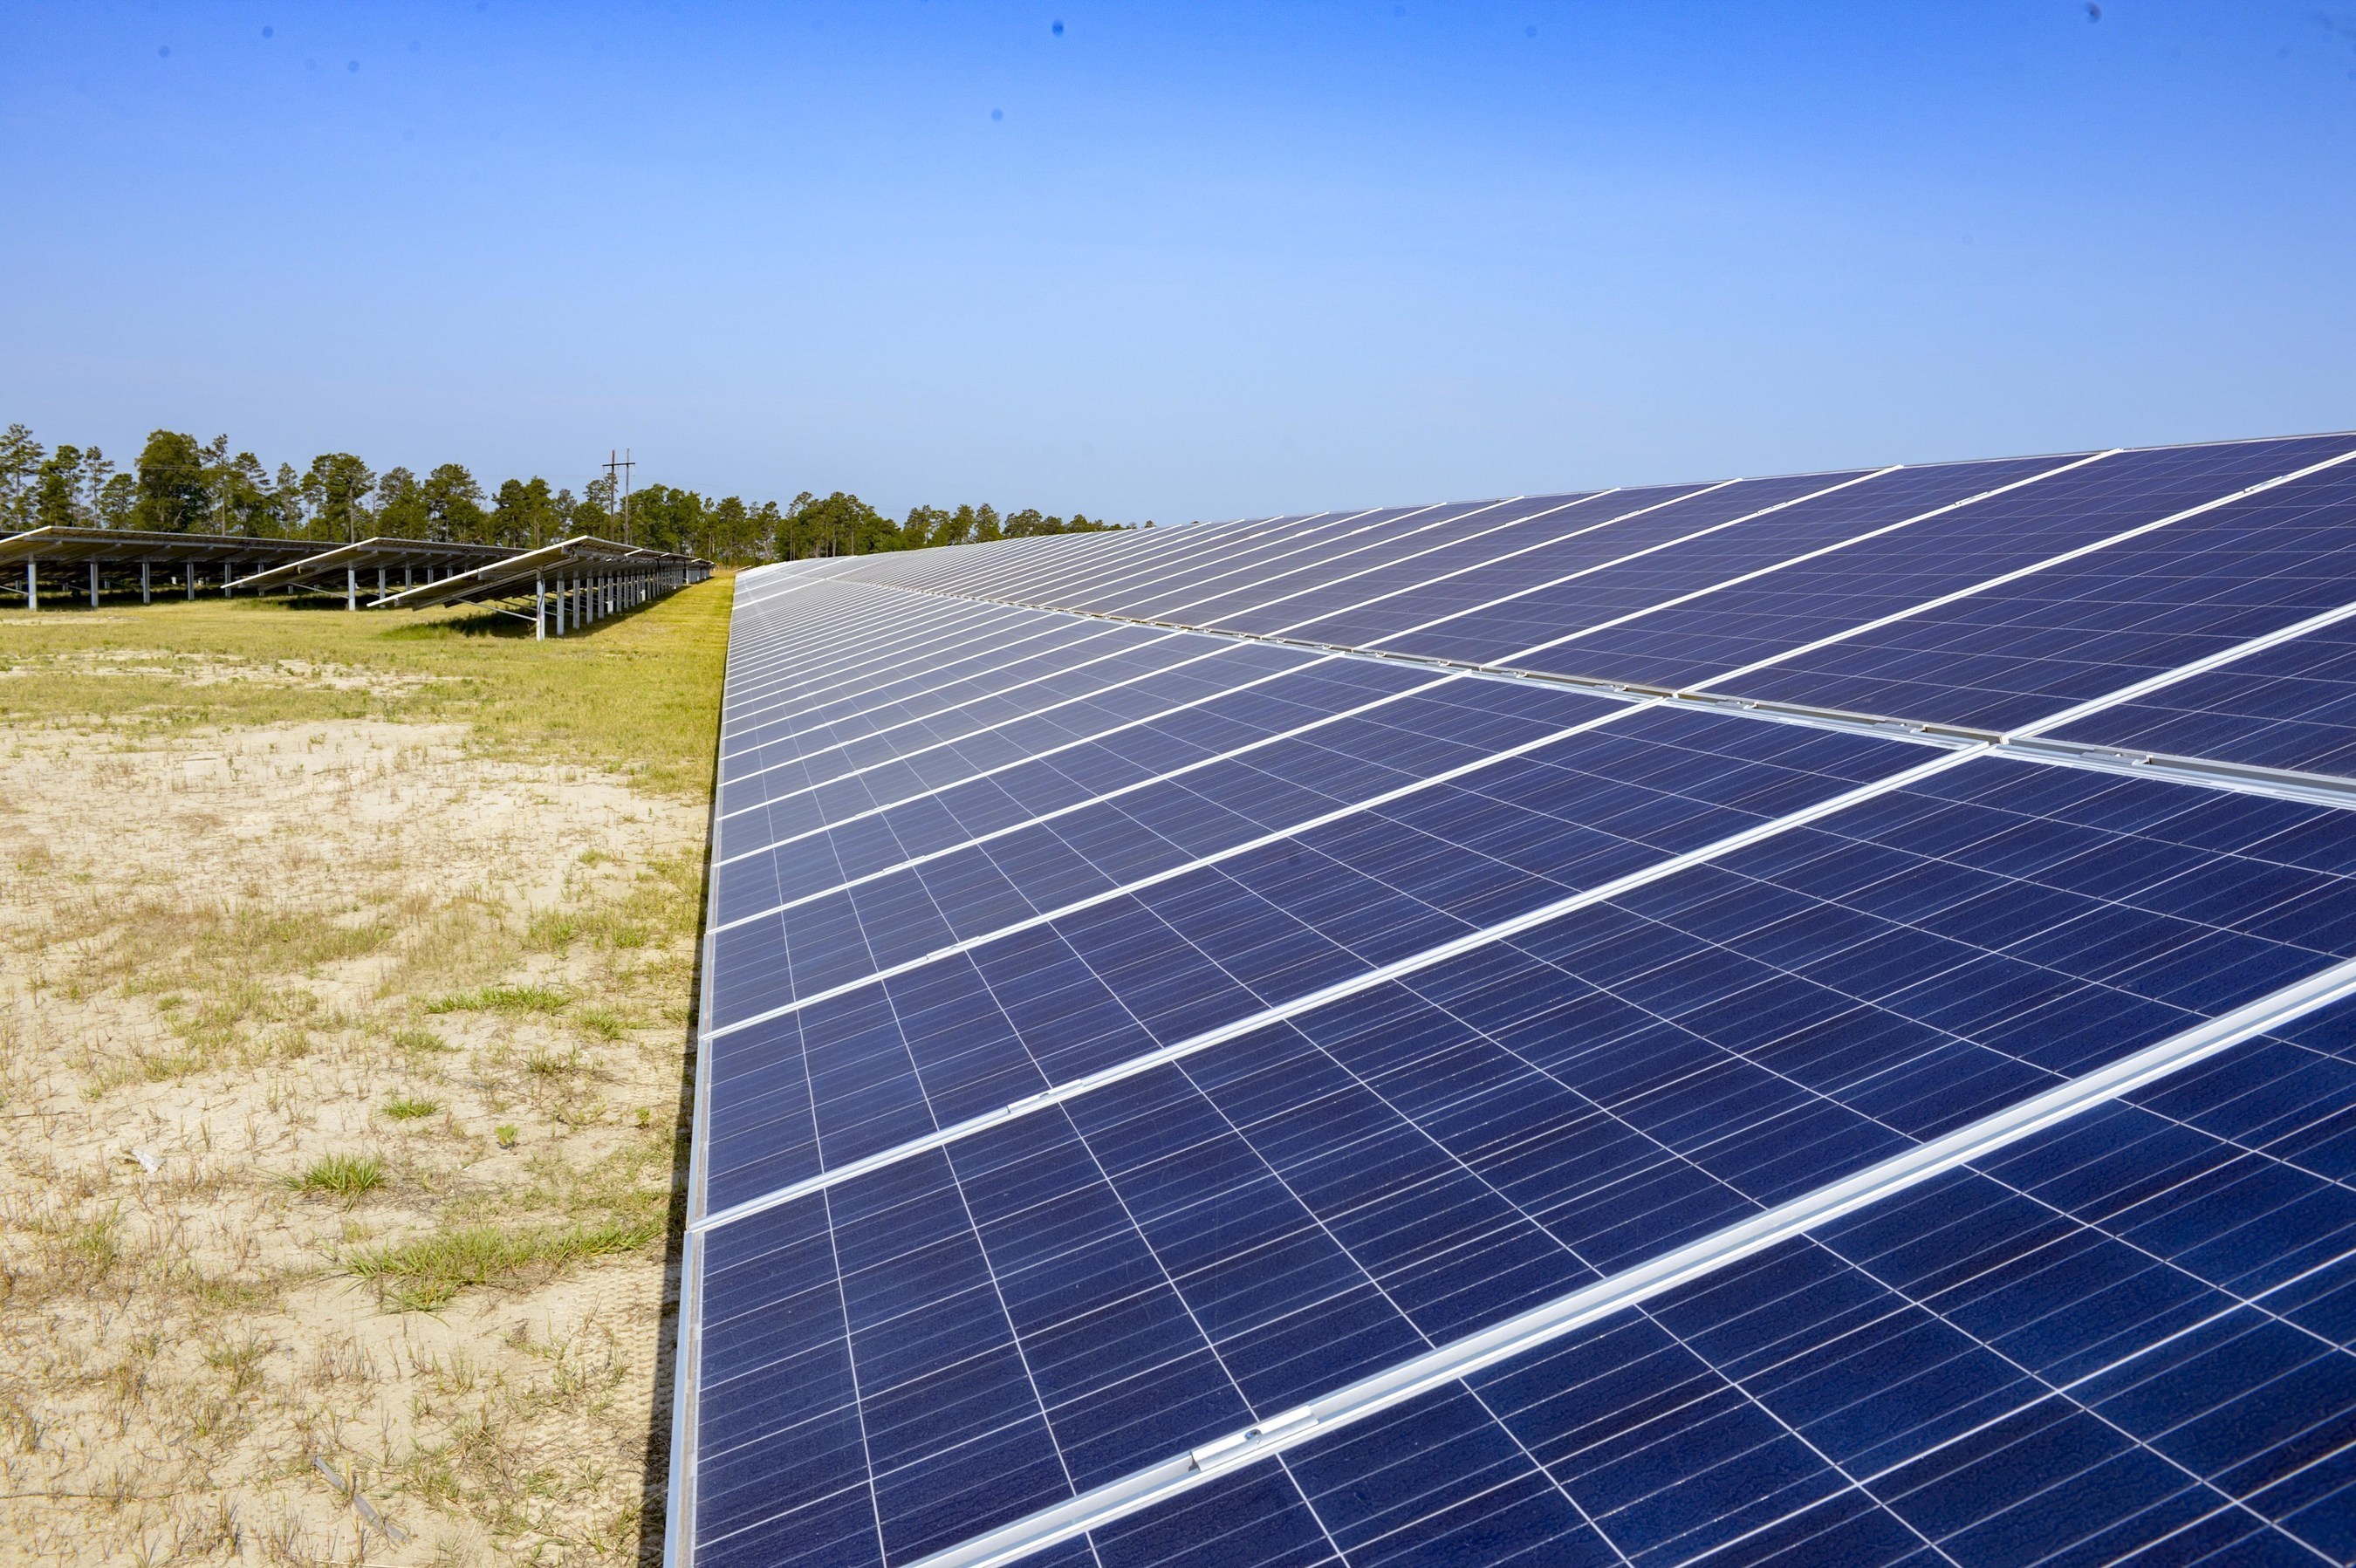 The 200-plus acre Fort Benning solar site uses nearly 134,000 photovoltaic panels to produce energy for Georgia homes and businesses.